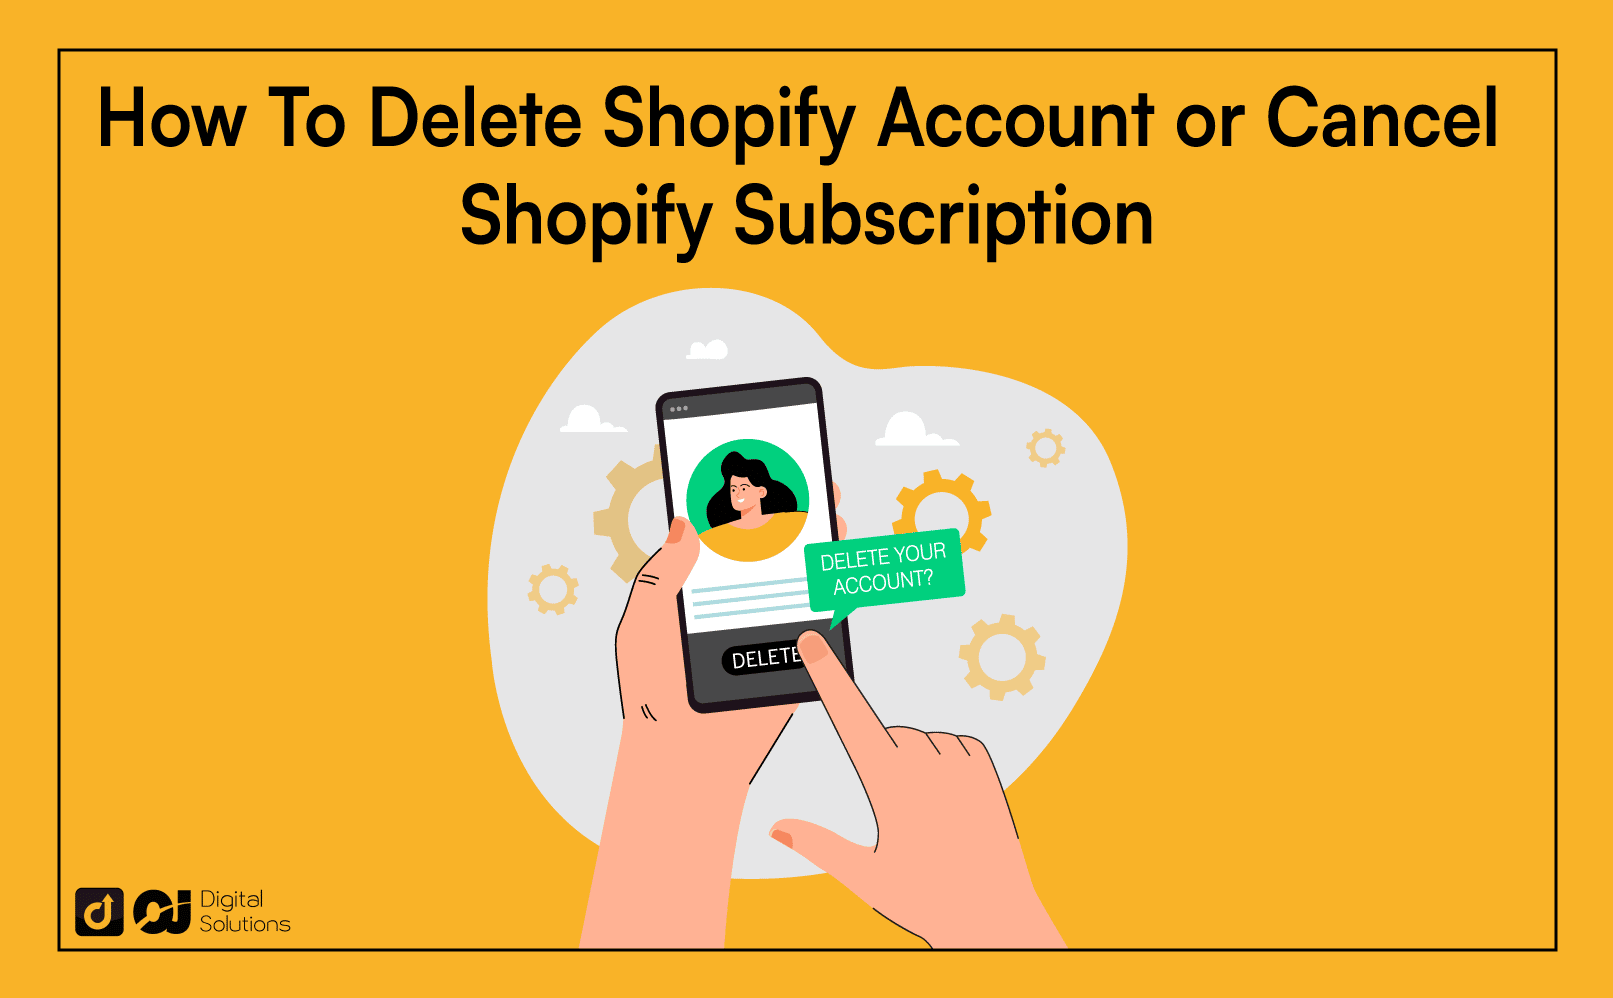 Have you googled “how to delete Shopify account” or "how to delete Shopify store" lately? I can help you. Check out my guide on deleting your Shopify account.